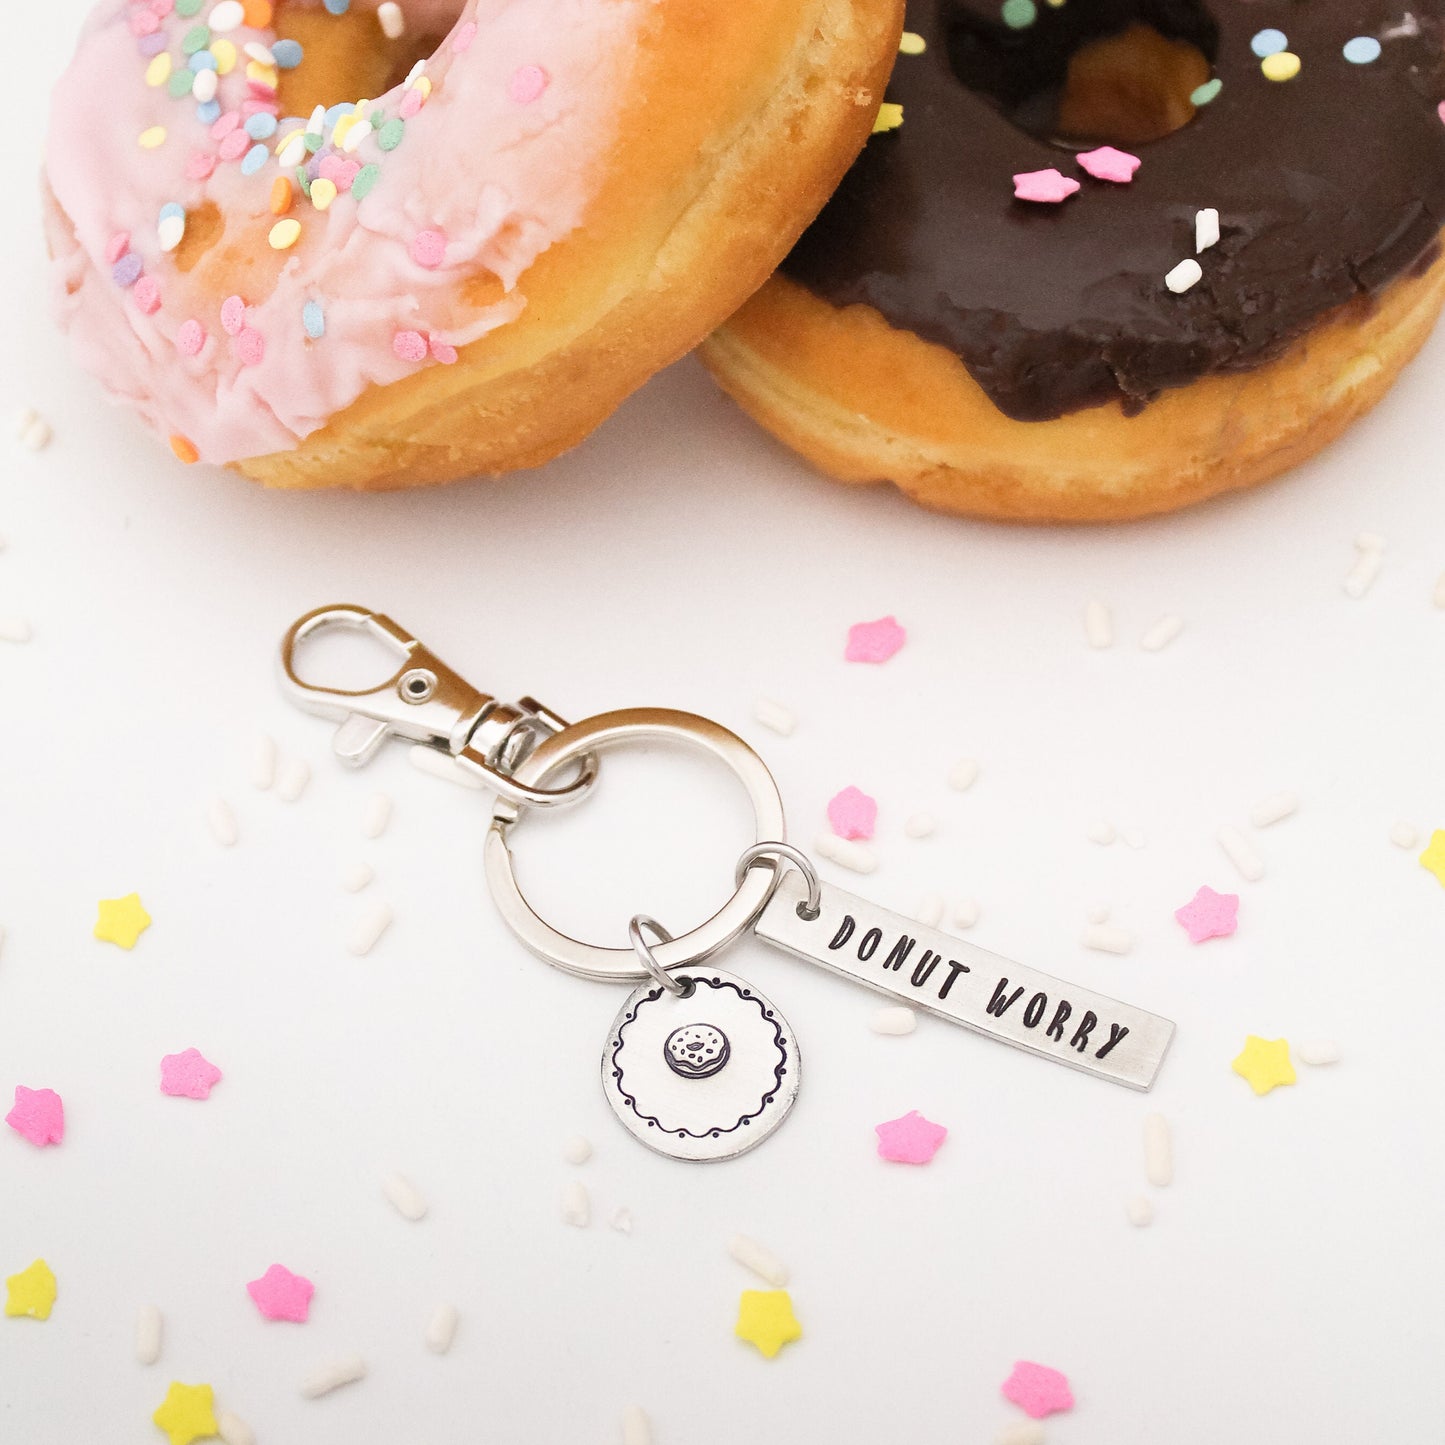 Donut Worry Keychain, Donut Keychain, Donut Lover Gift, Donut Key Chain, Personalized Hand Stamped, Gift for Him, Gift for Her